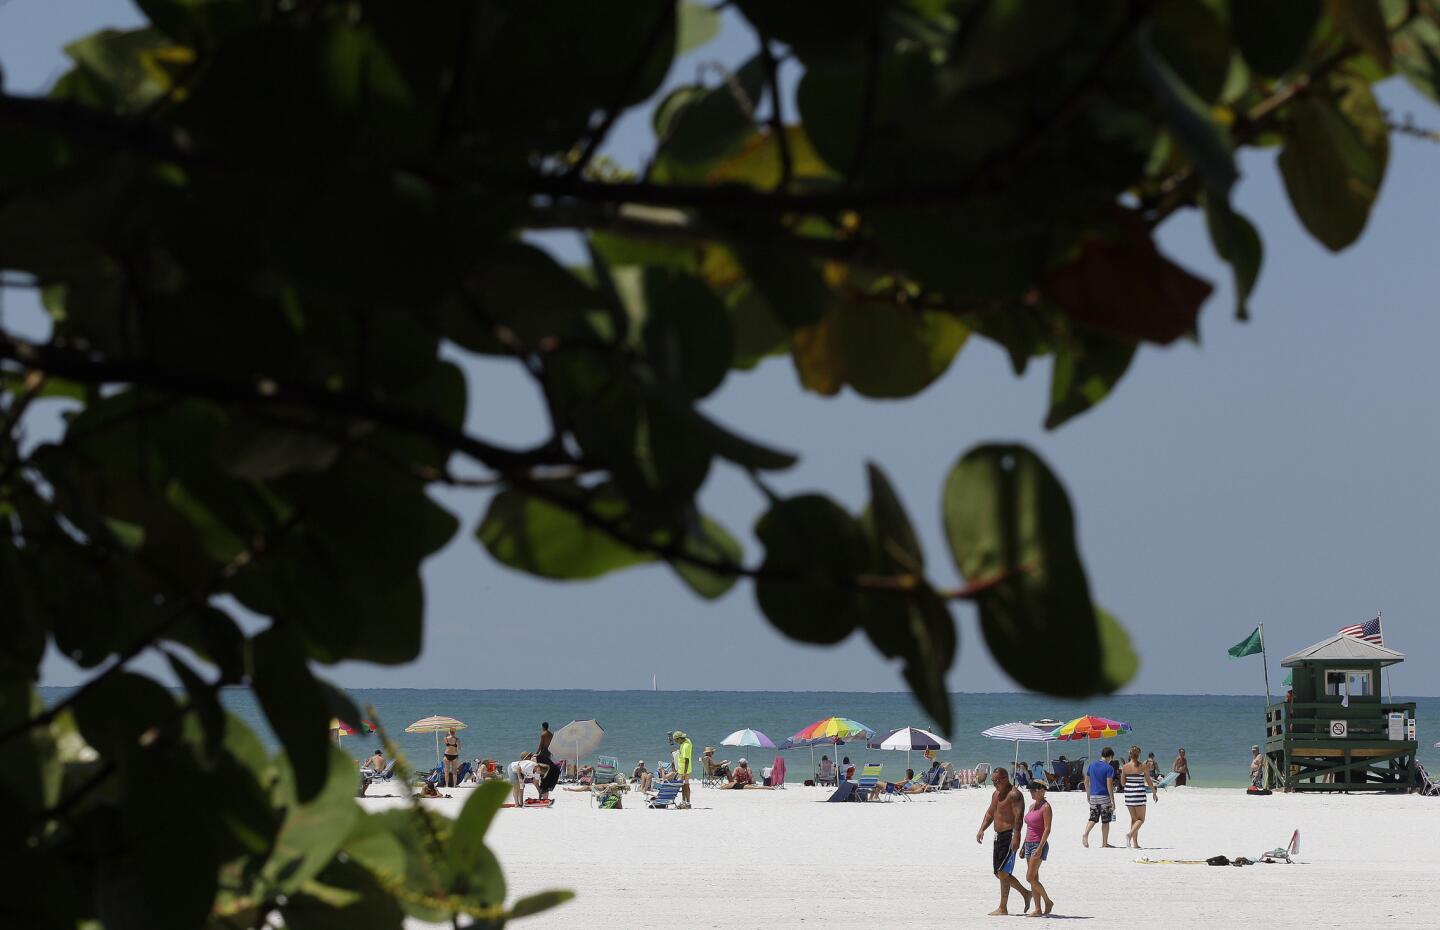 This May 18, 2011 file photo shows the Siesta Key public beach in Sarasota, Fla. Siesta Key is No. 1 on the list of best beaches for the summer of 2017 compiled by Stephen Leatherman, also known as Dr. Beach, a professor at Florida International University.